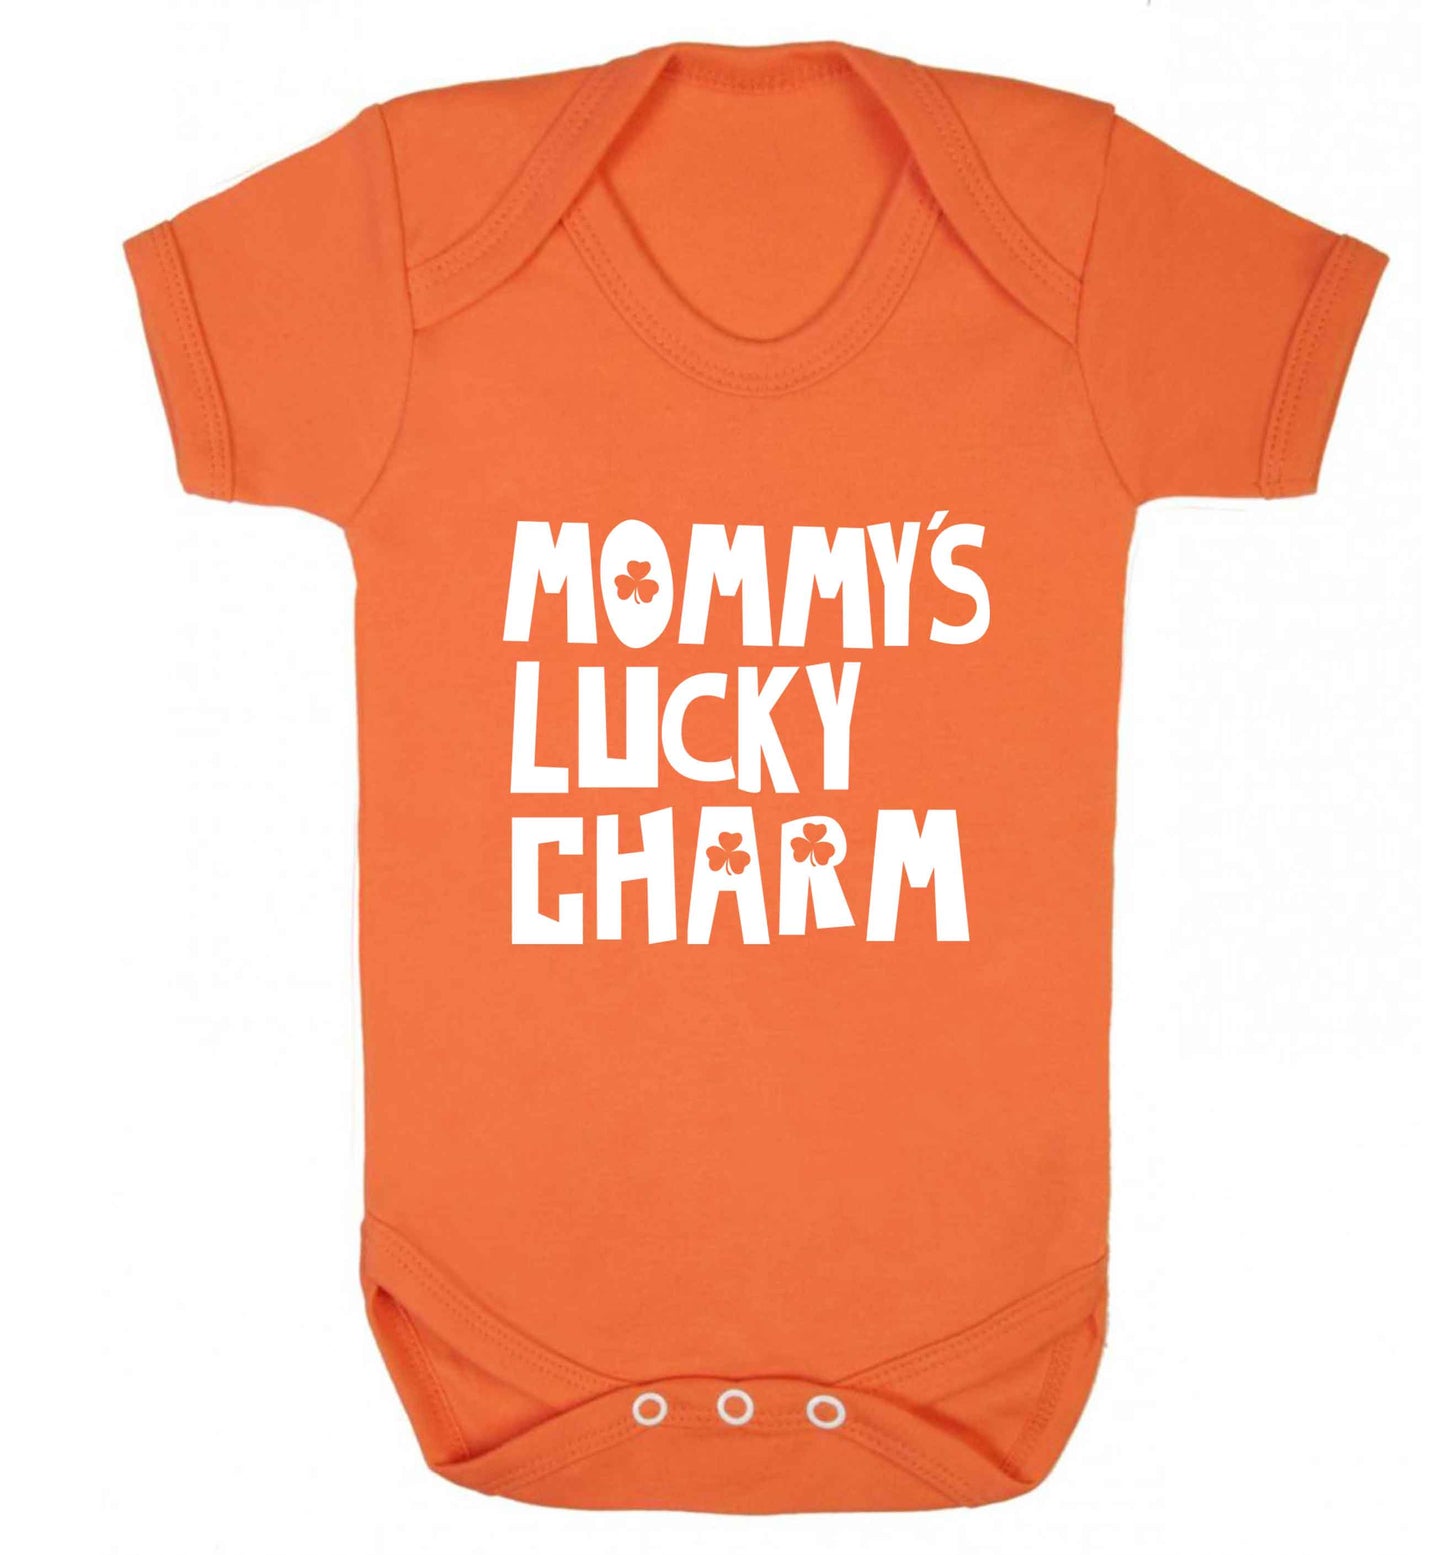 Mommy's lucky charm baby vest orange 18-24 months